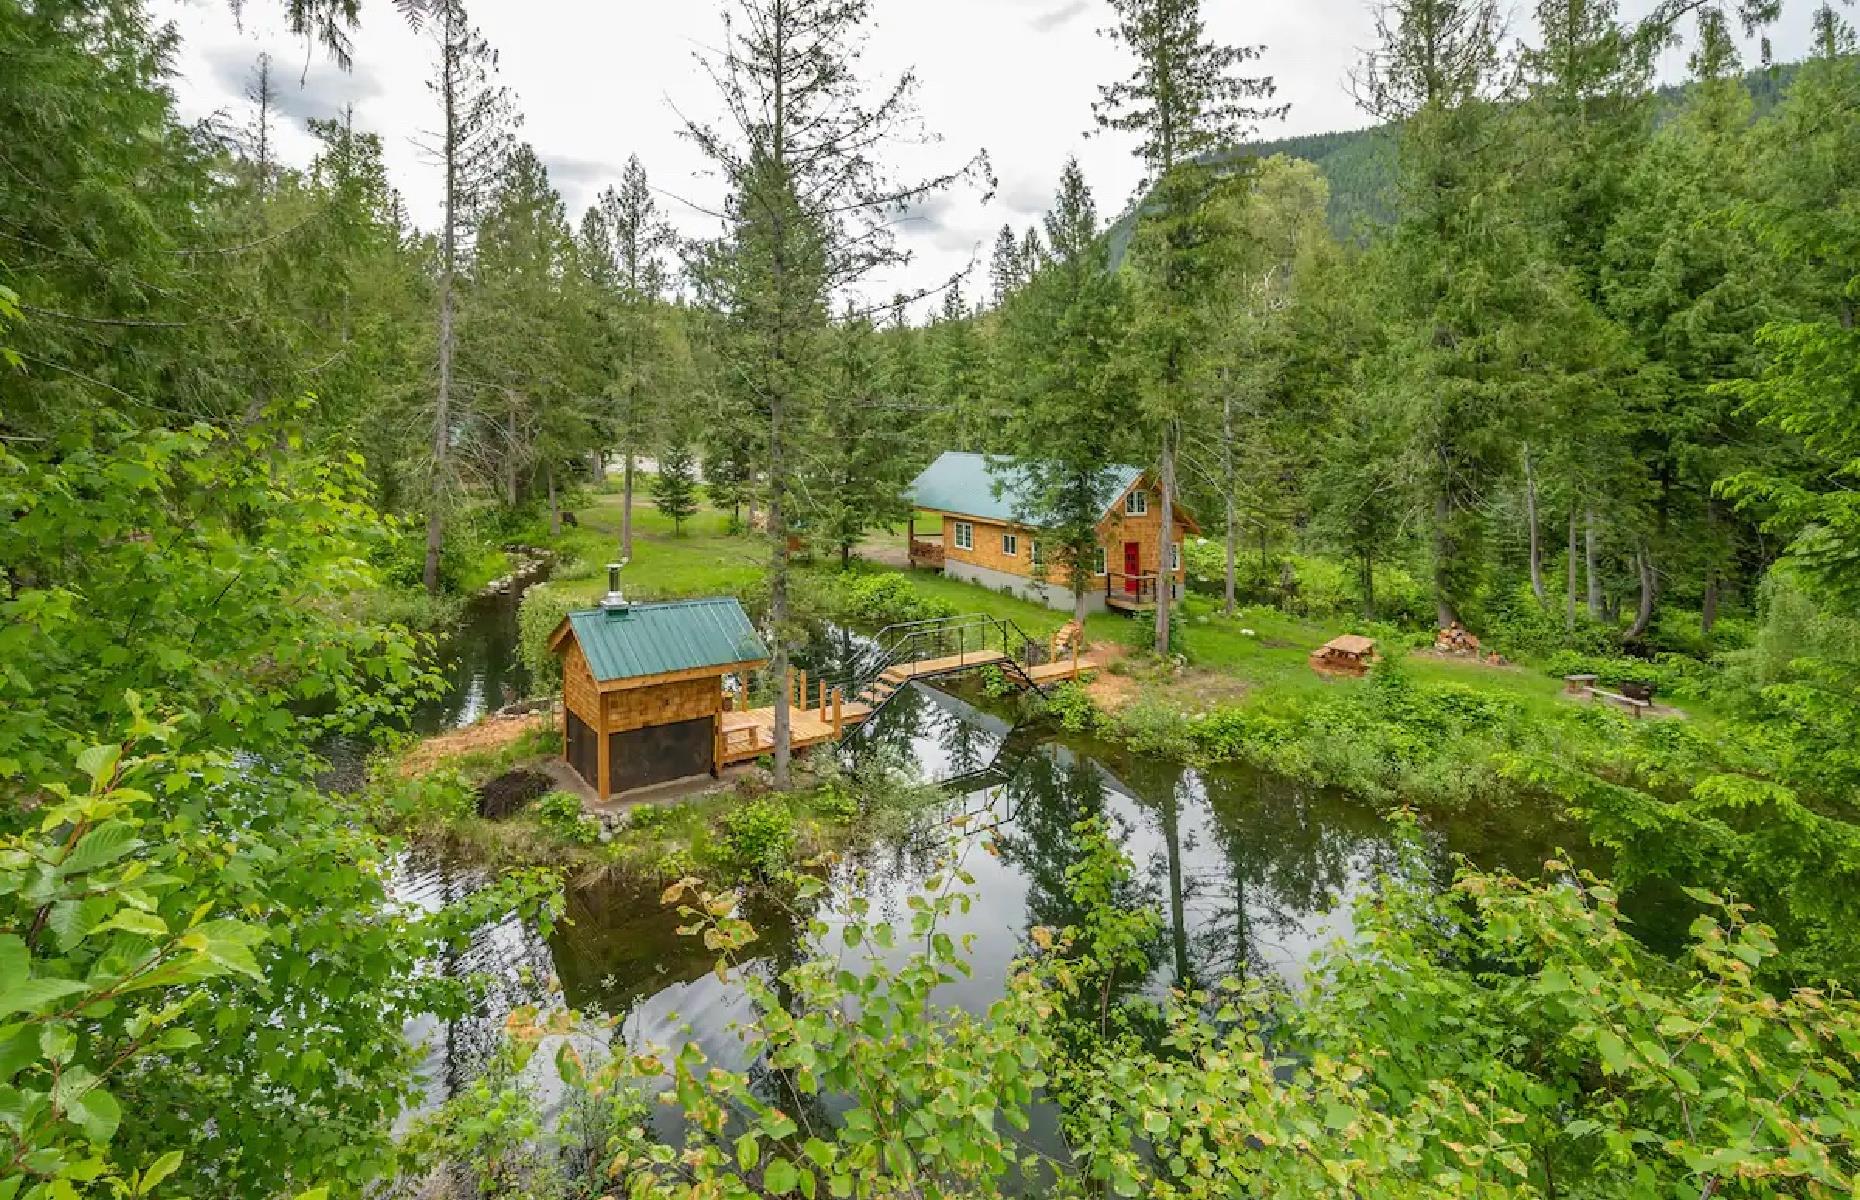 <p>British Columbia’s West Kootenay region is well off the beaten path and this <a href="https://www.airbnb.co.uk/rooms/42491538?adults=1&category_tag=Tag%3A8175&children=0&infants=0&check_in=2022-10-05&check_out=2022-10-10&federated_search_id=39a2ce82-f294-4c23-92c8-bfe11c4229de&source_impression_id=p3_1662841937_em2xd13Y3%2FFQ2ctN">rustic cabin</a>, surrounded by forest and pure lake waters, offers true seclusion. There are no local restaurants nearby, so make sure to stock the place with food before enjoying hiking, fishing and swimming in the lake. The lofted cabin can sleep up to six people and guests are also welcome to indulge in the outdoor sauna, located just a few steps away from the main house. </p>